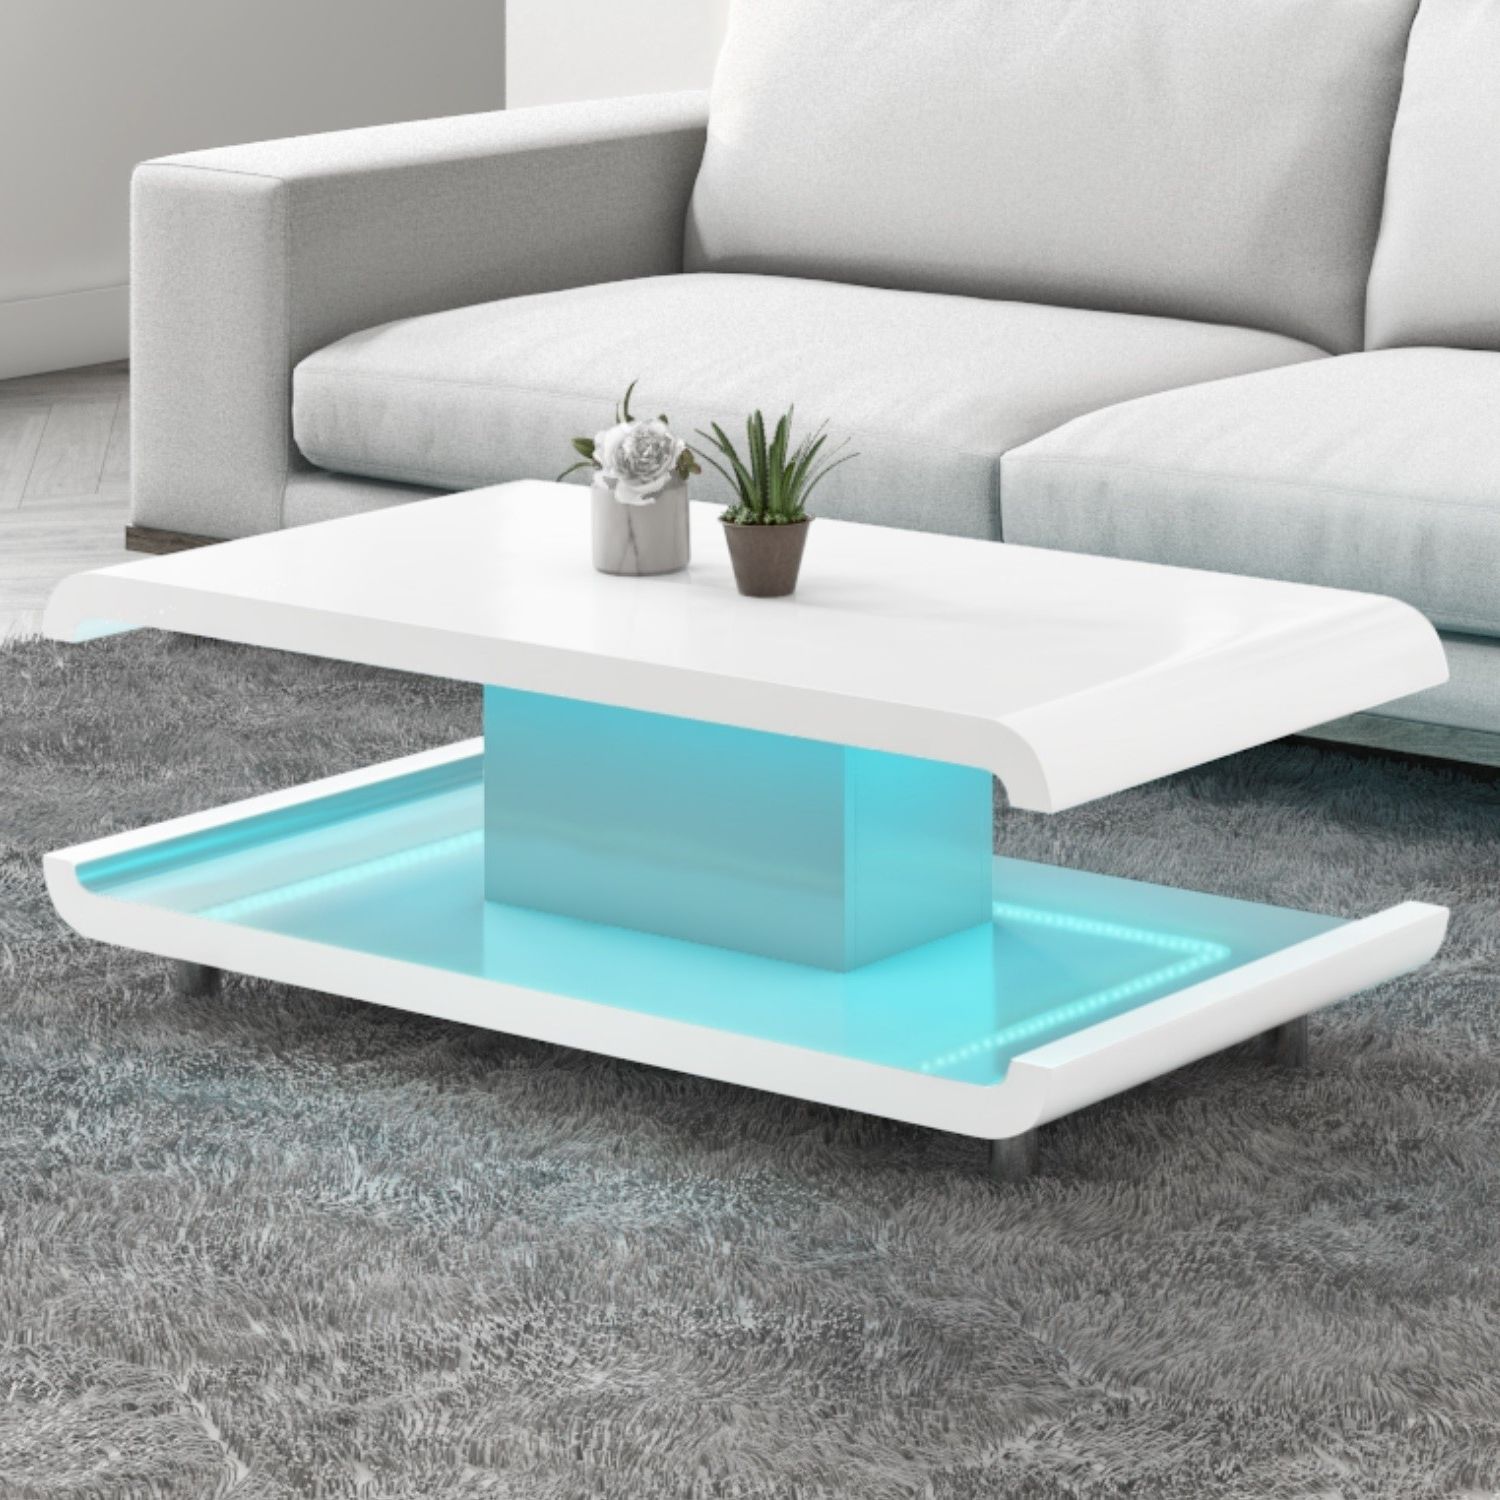 Rectangular Led Coffee Tables Within Well Known White Coffee Table With Led Lights / High Gloss White Coffee Table With (View 13 of 15)